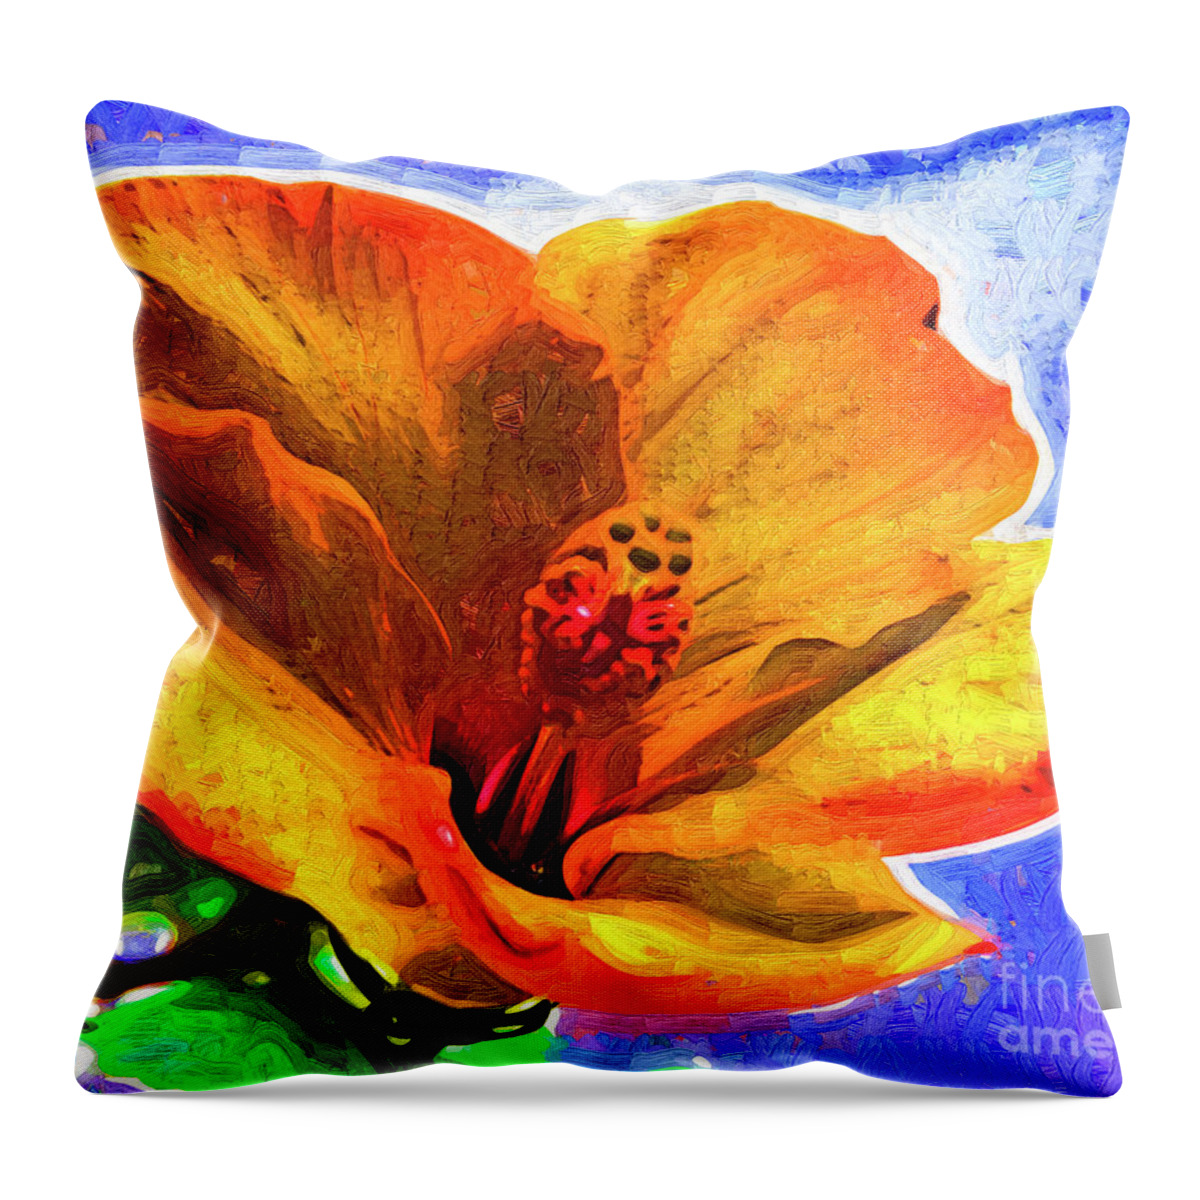 Flowers Throw Pillow featuring the digital art Orange Hibiscus by Kirt Tisdale